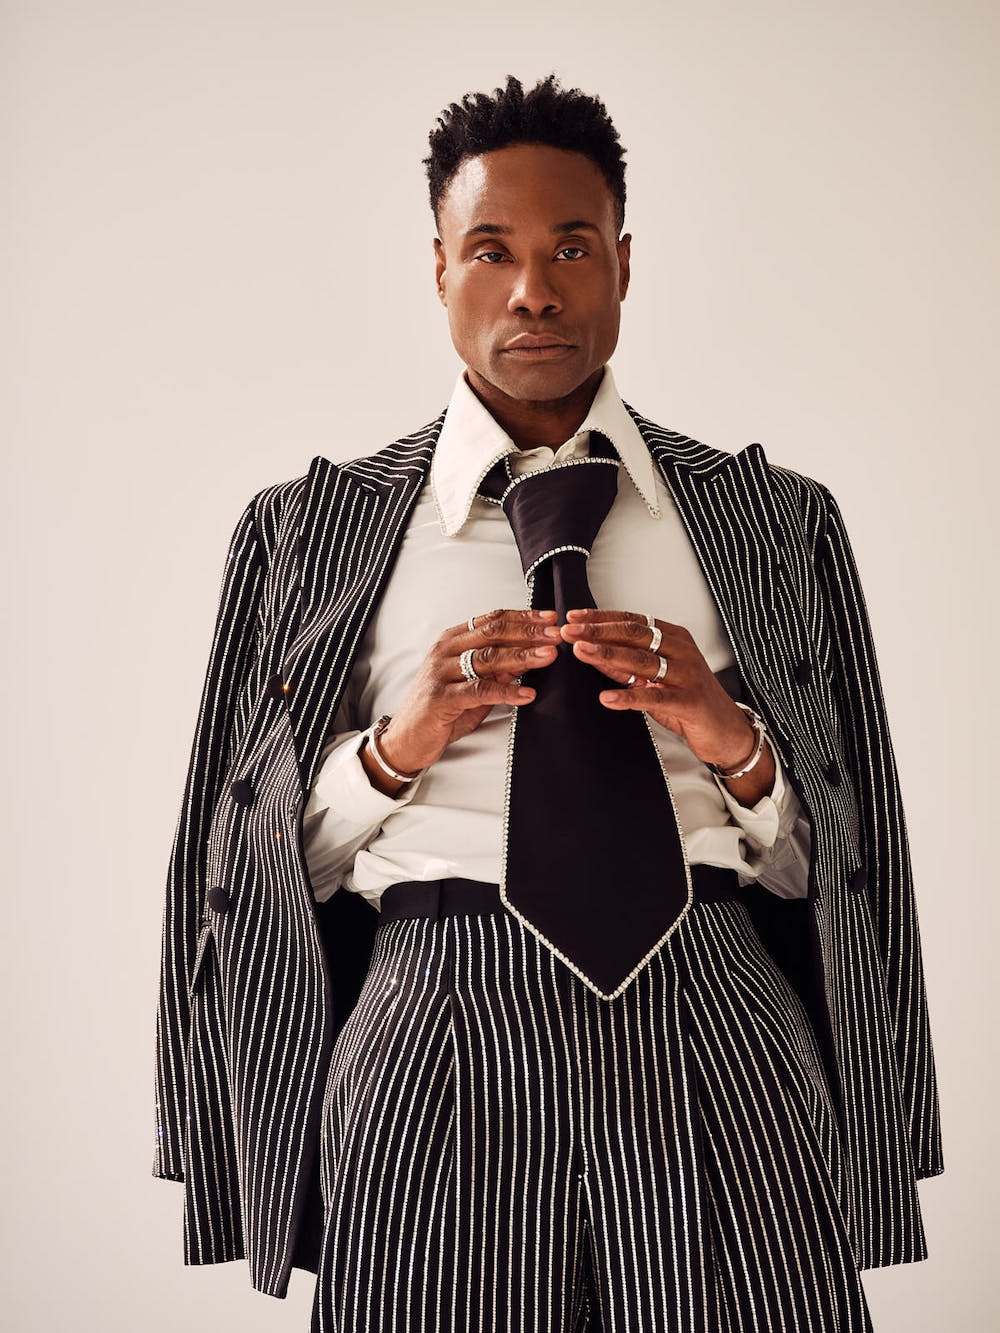  Billy Porter Talks About His Movie Directing Debut: Anything’s Possible